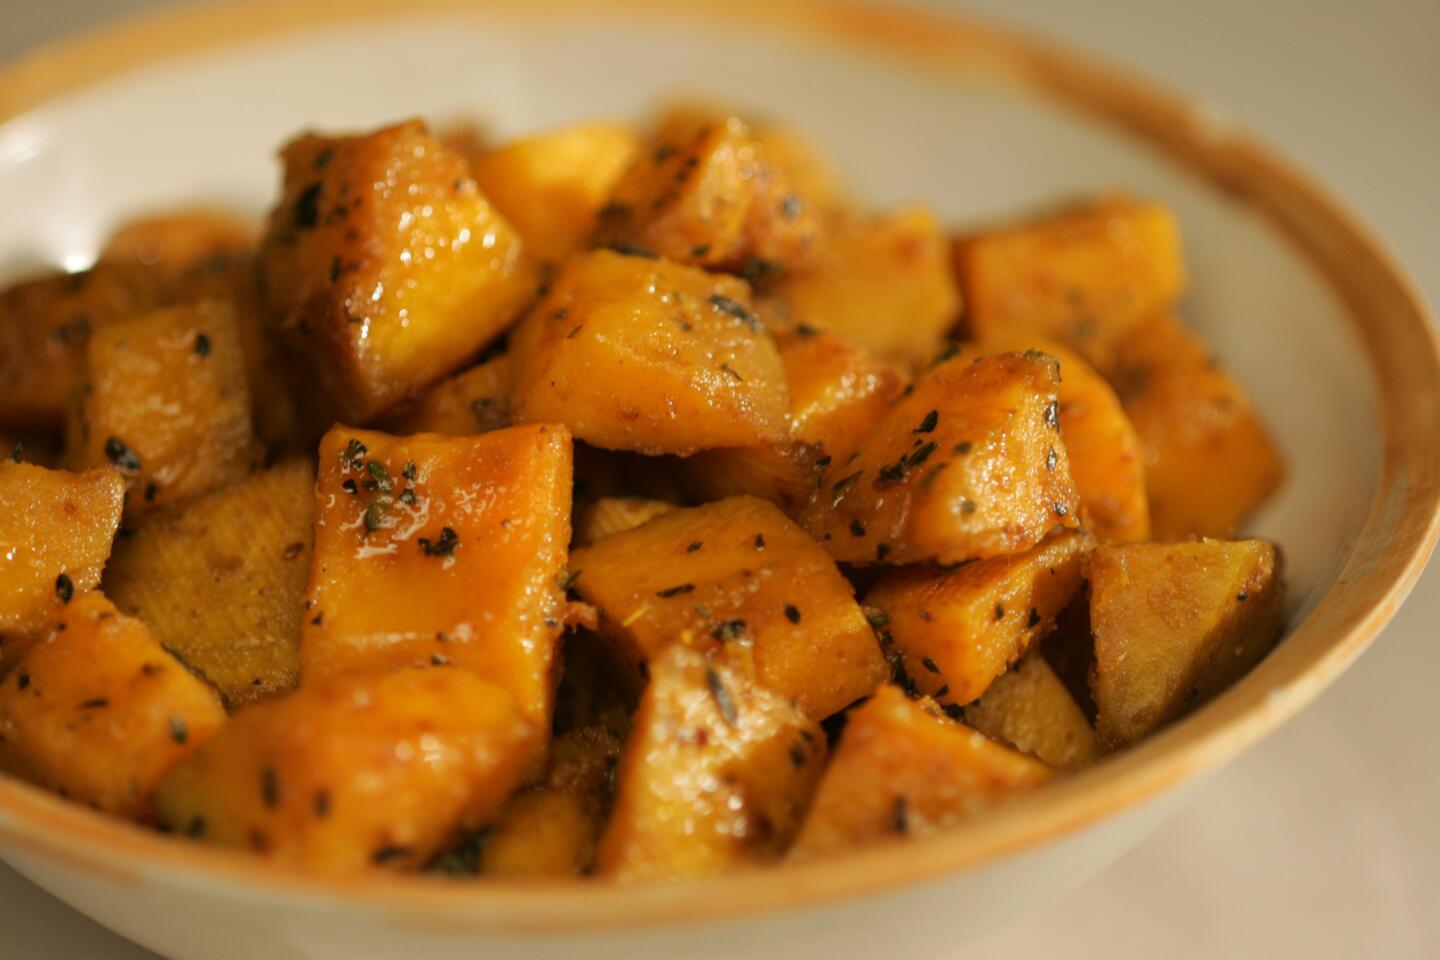 Of winter squash and sweet potatoes